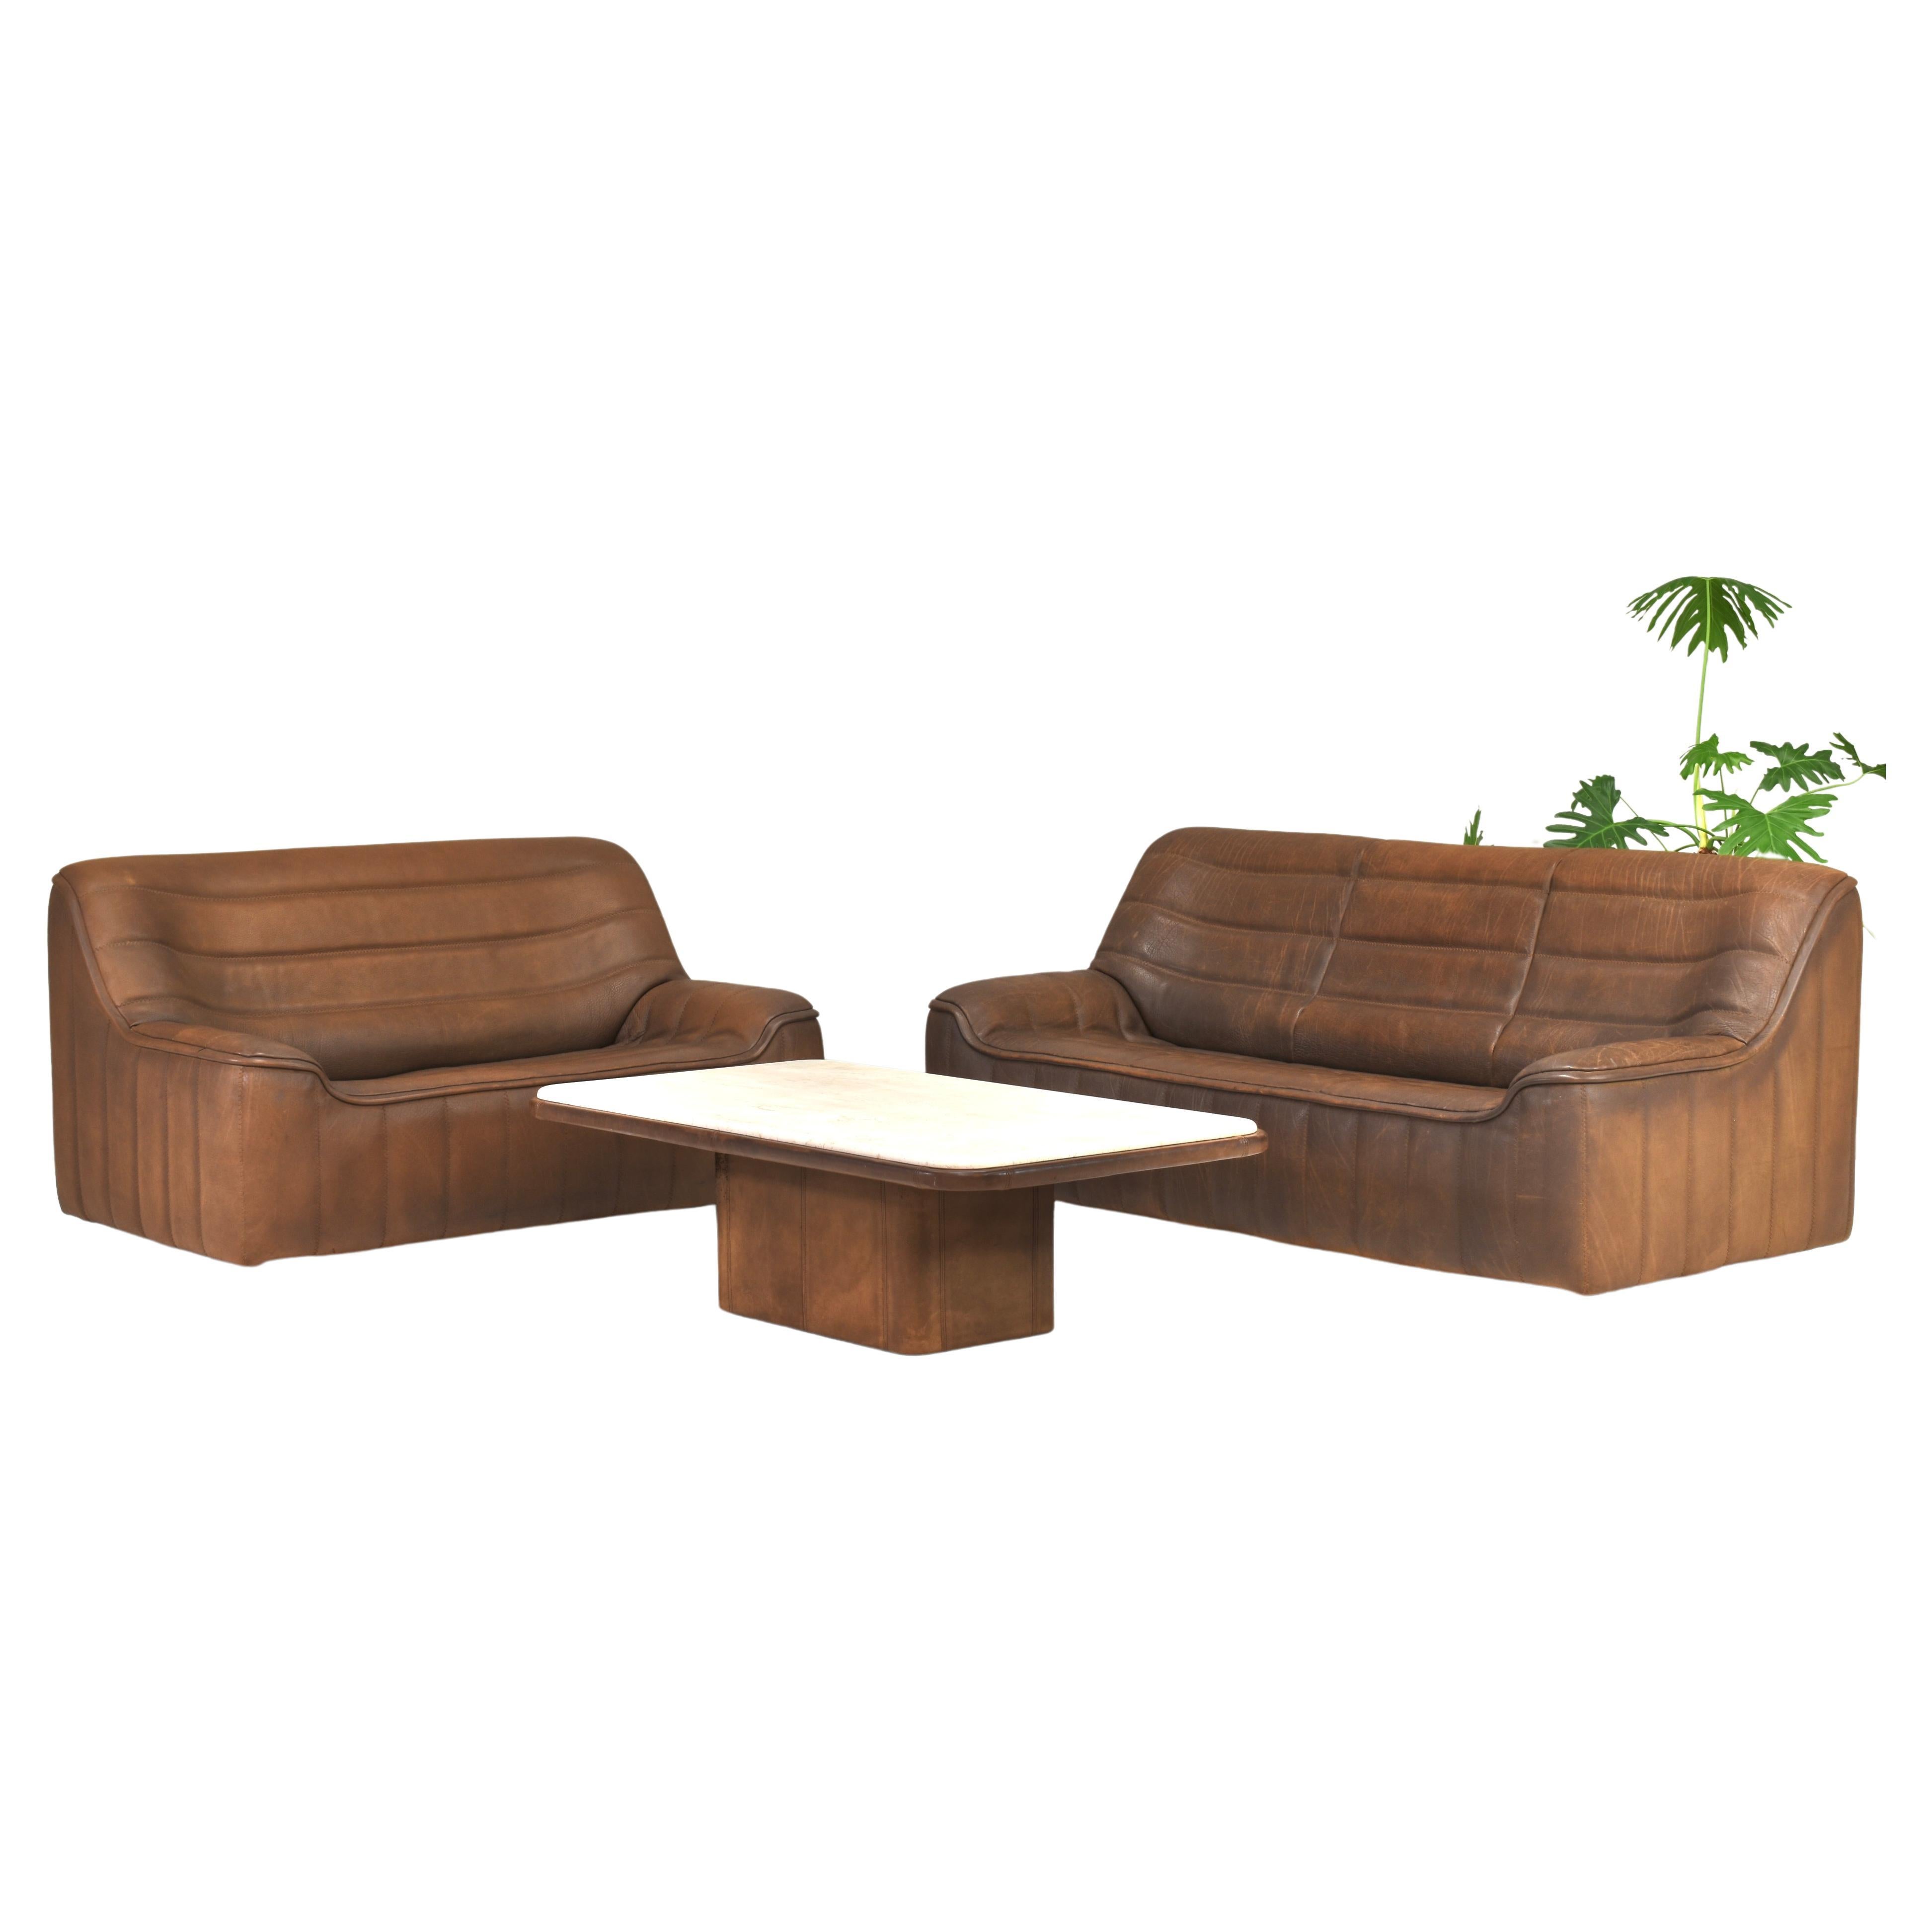 De Sede DS-84 Living room set in Tan Buffalo leather – Switzerland, circa 1970 For Sale